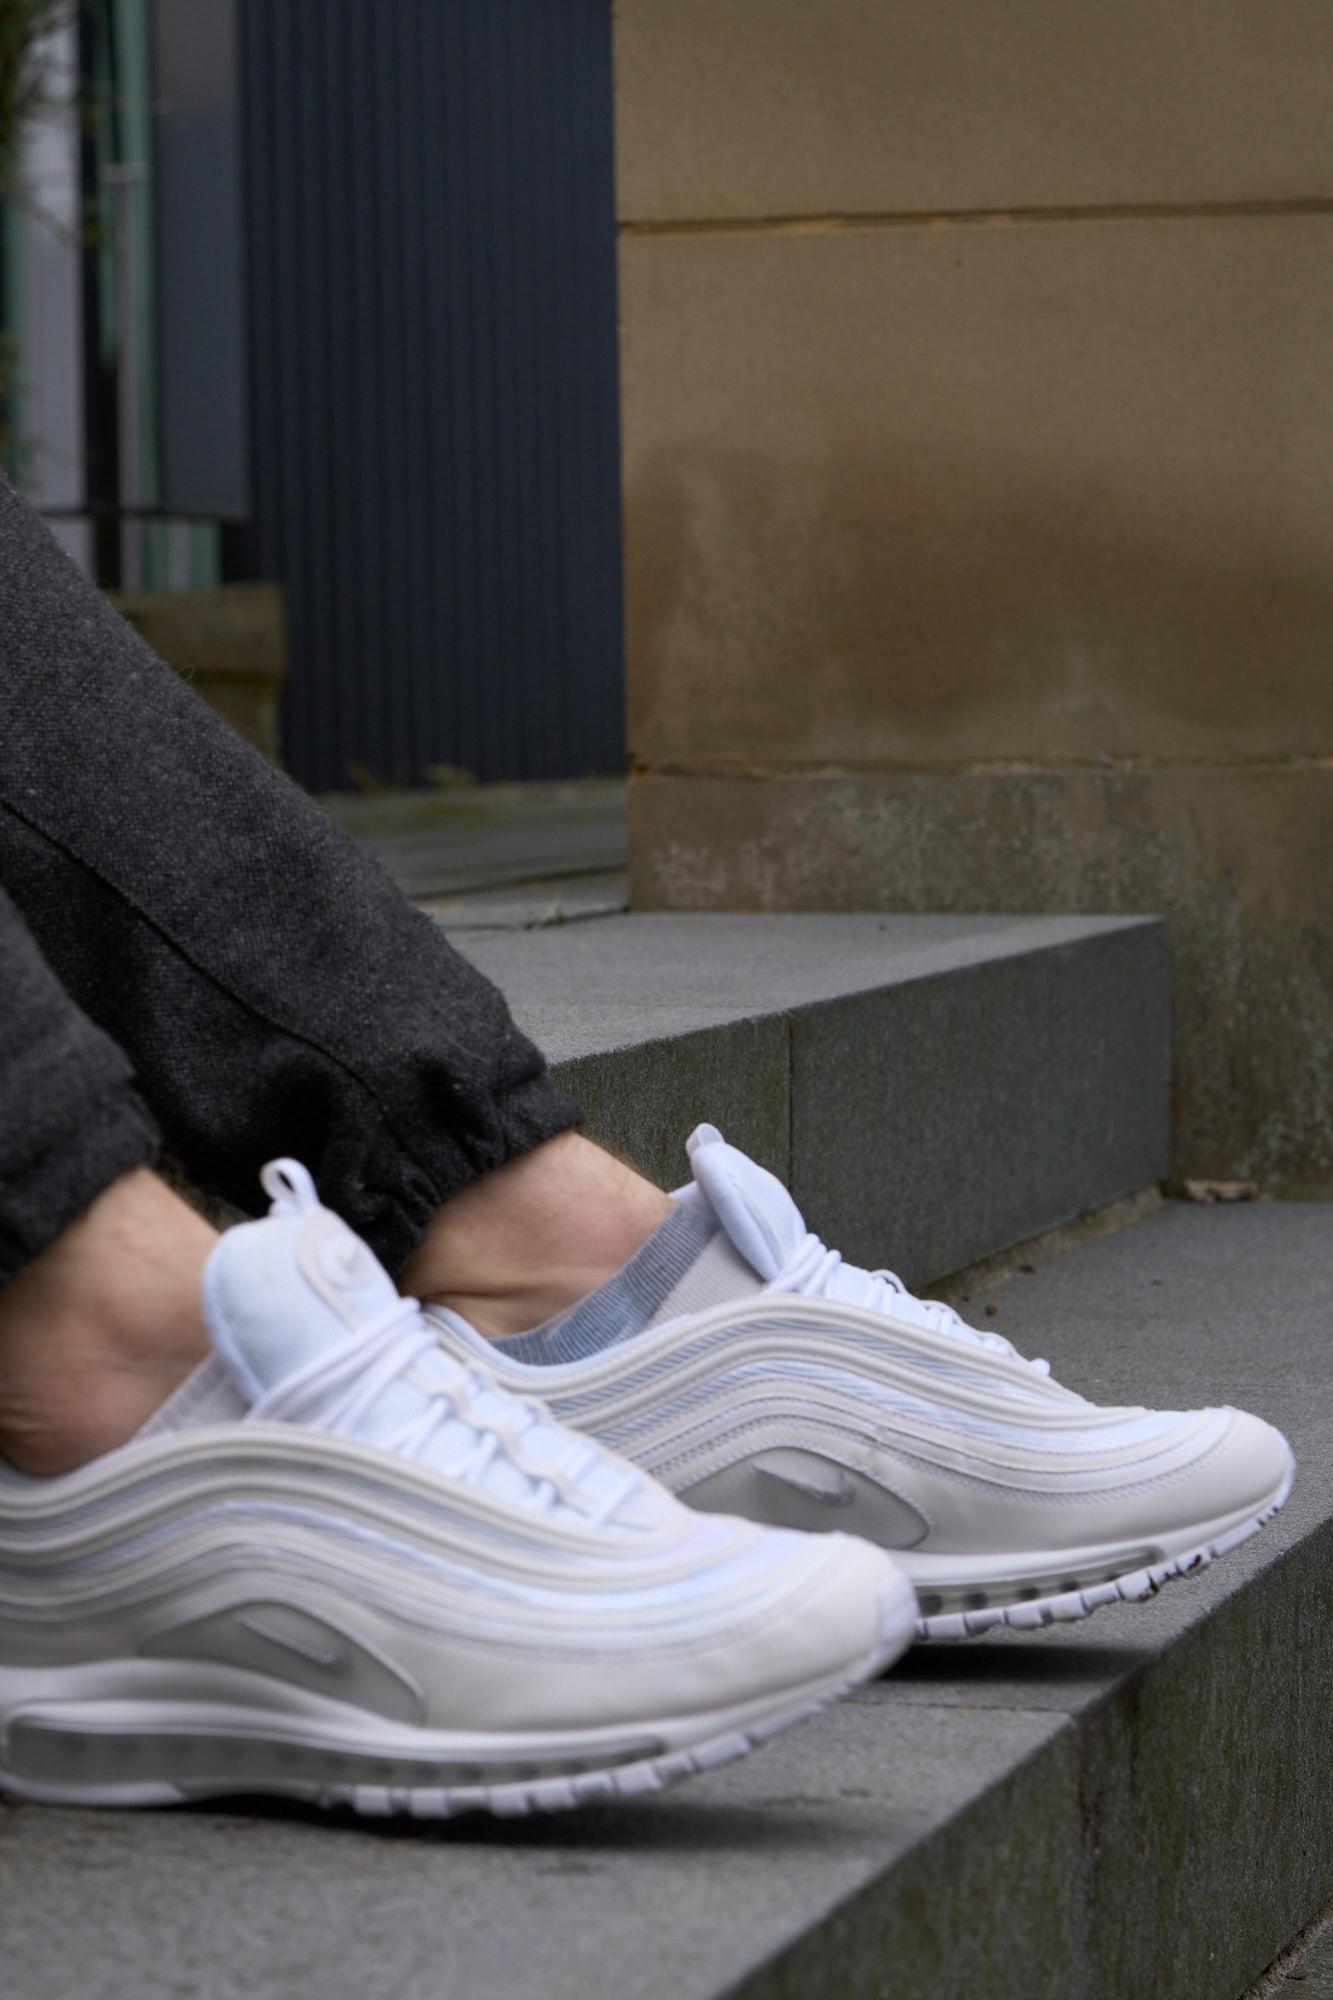 Interesting stuff about the Air Max 97, by The Sneakulture